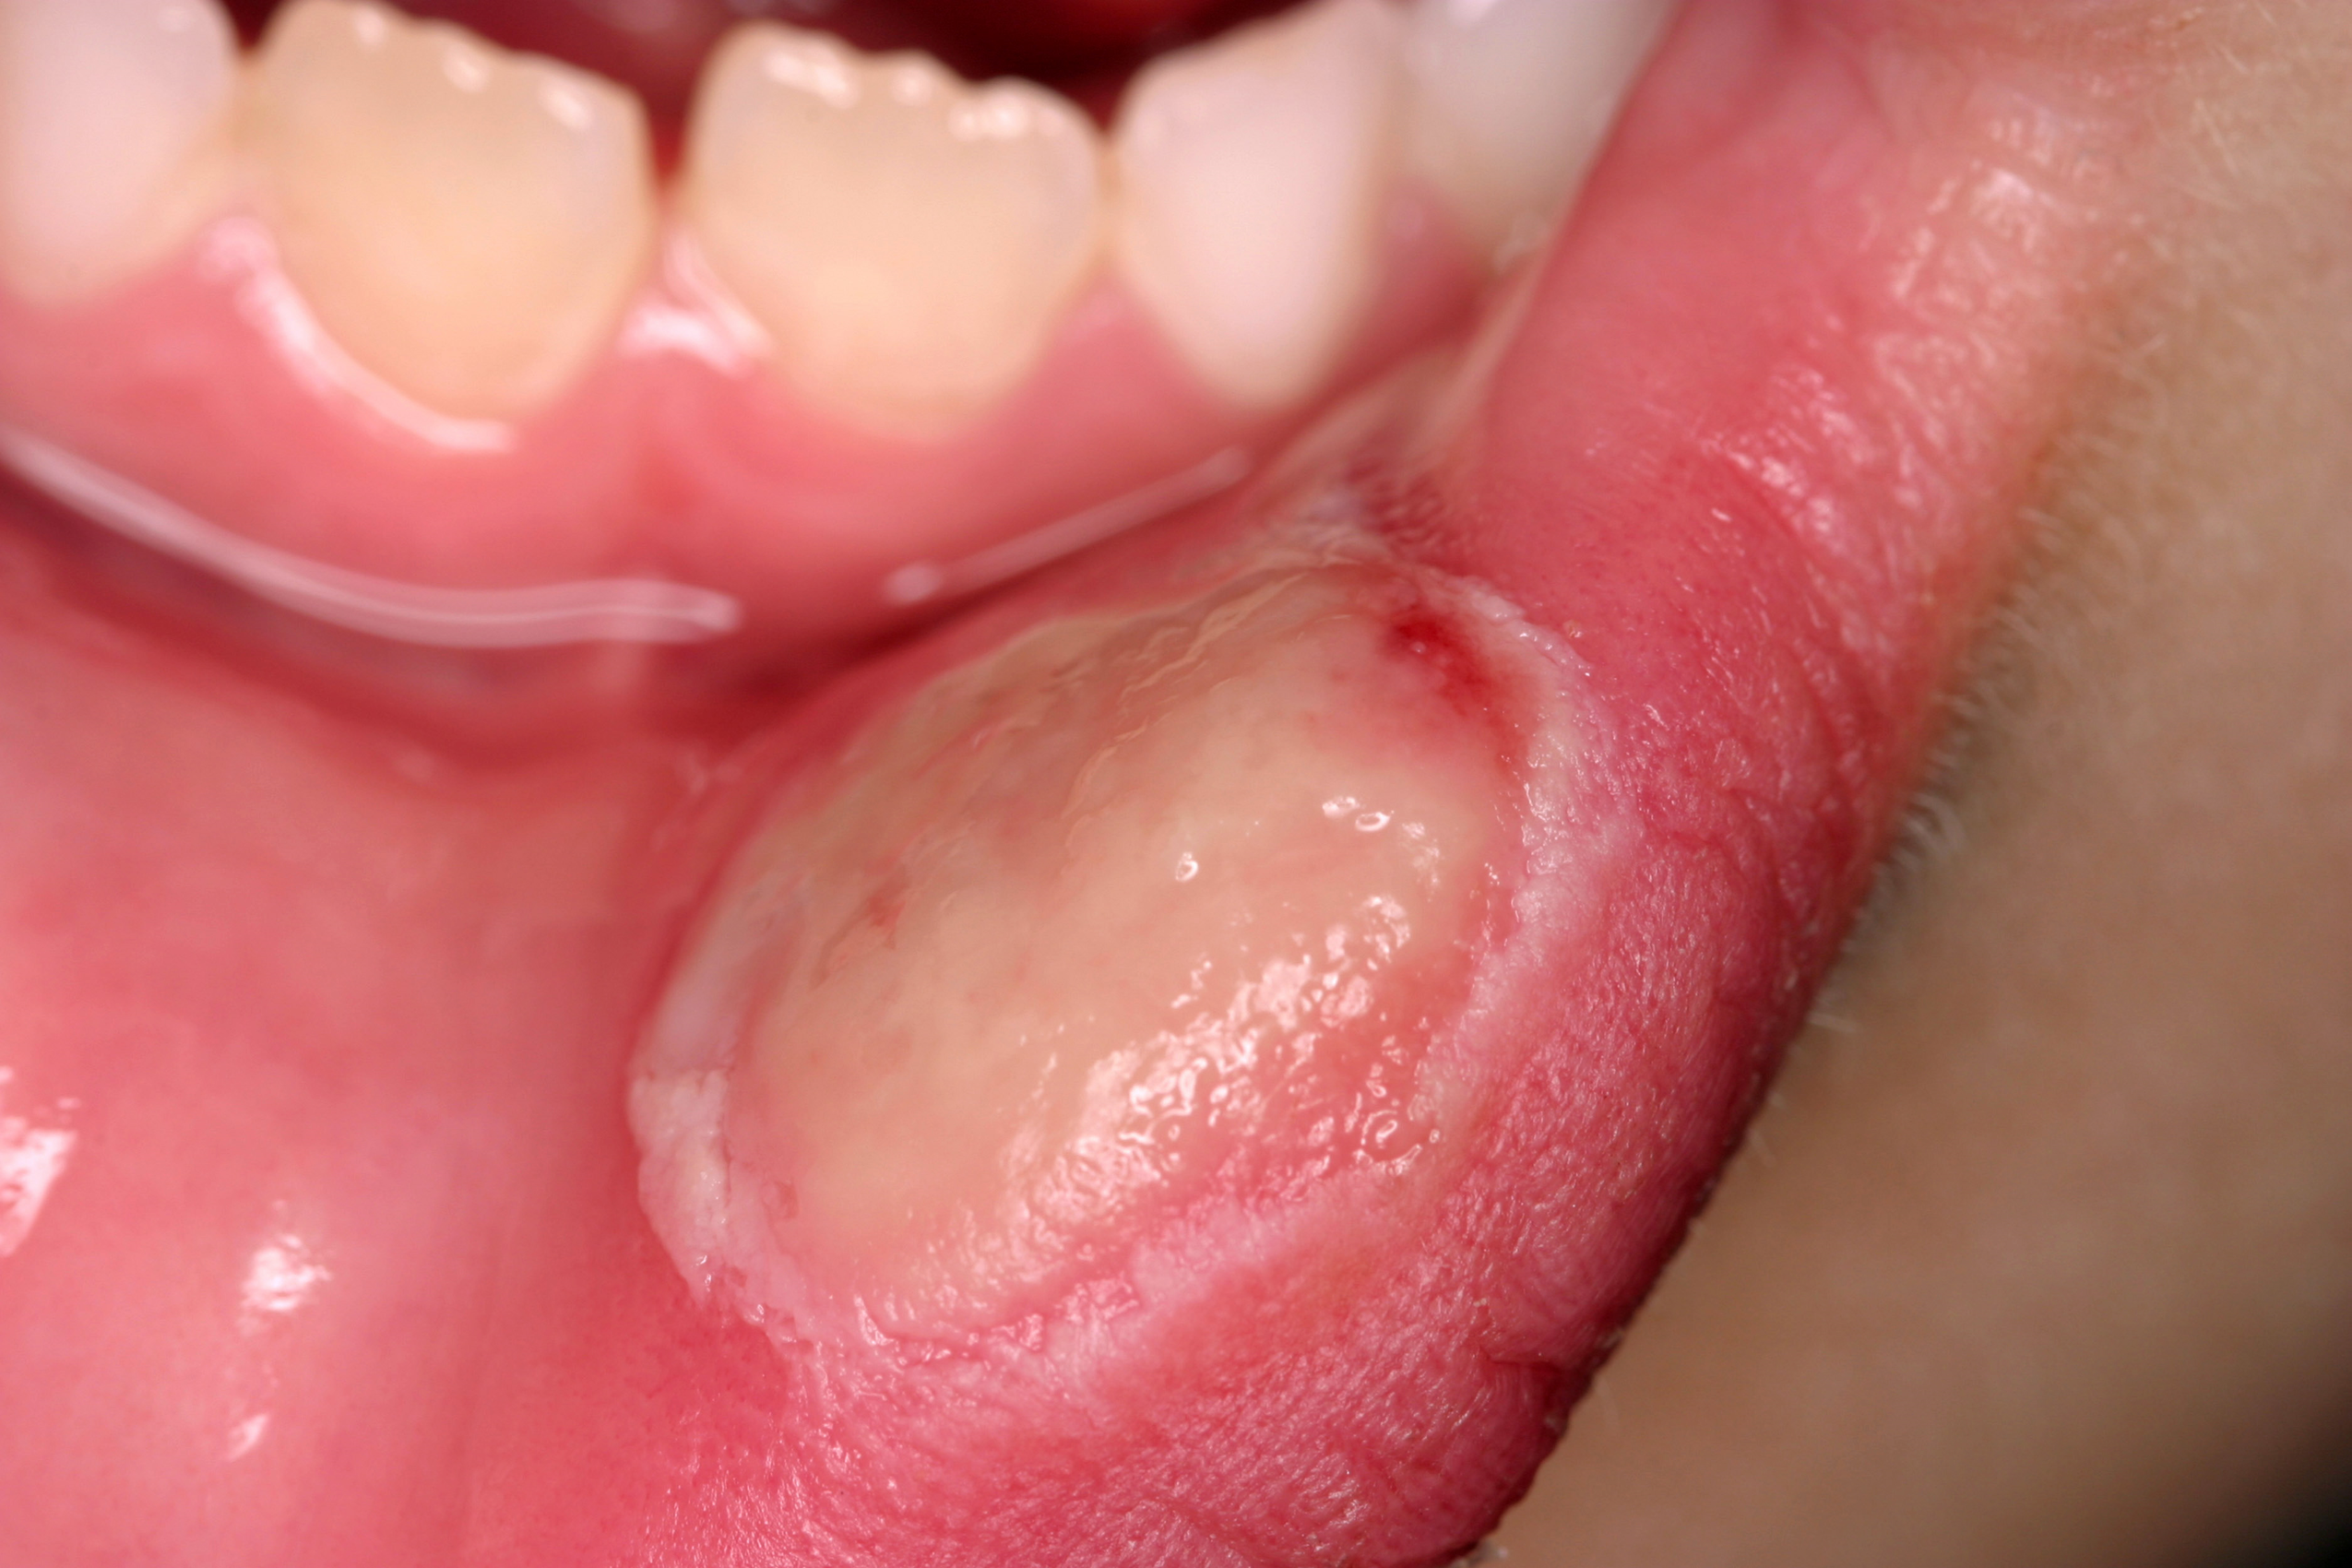 Human papillomavirus mouth sores - Hpv vaccine side effects pubmed